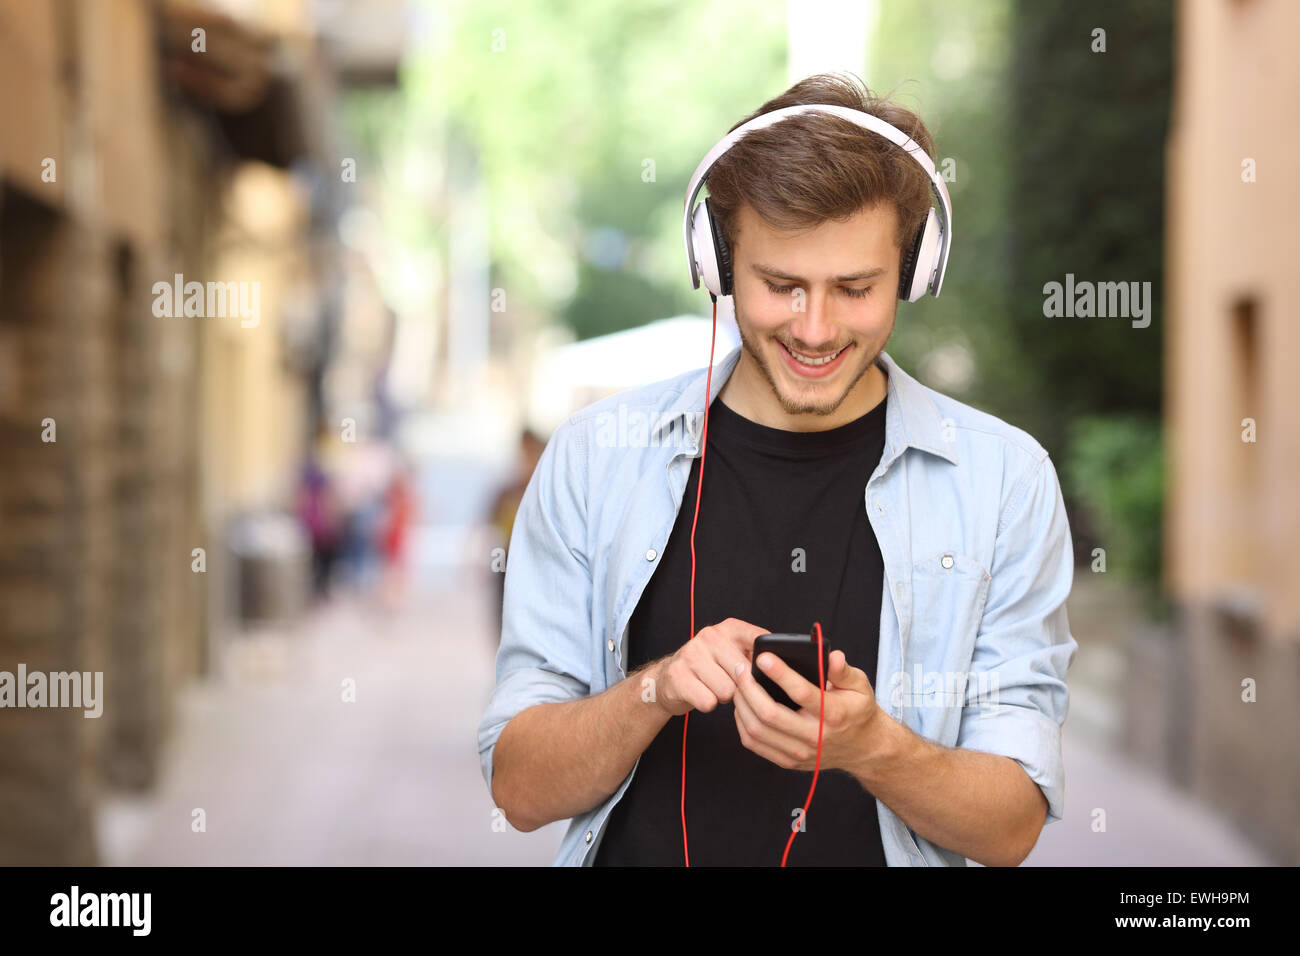 Happy guy walking and using a smart phone to listen music with headphones Stock Photo